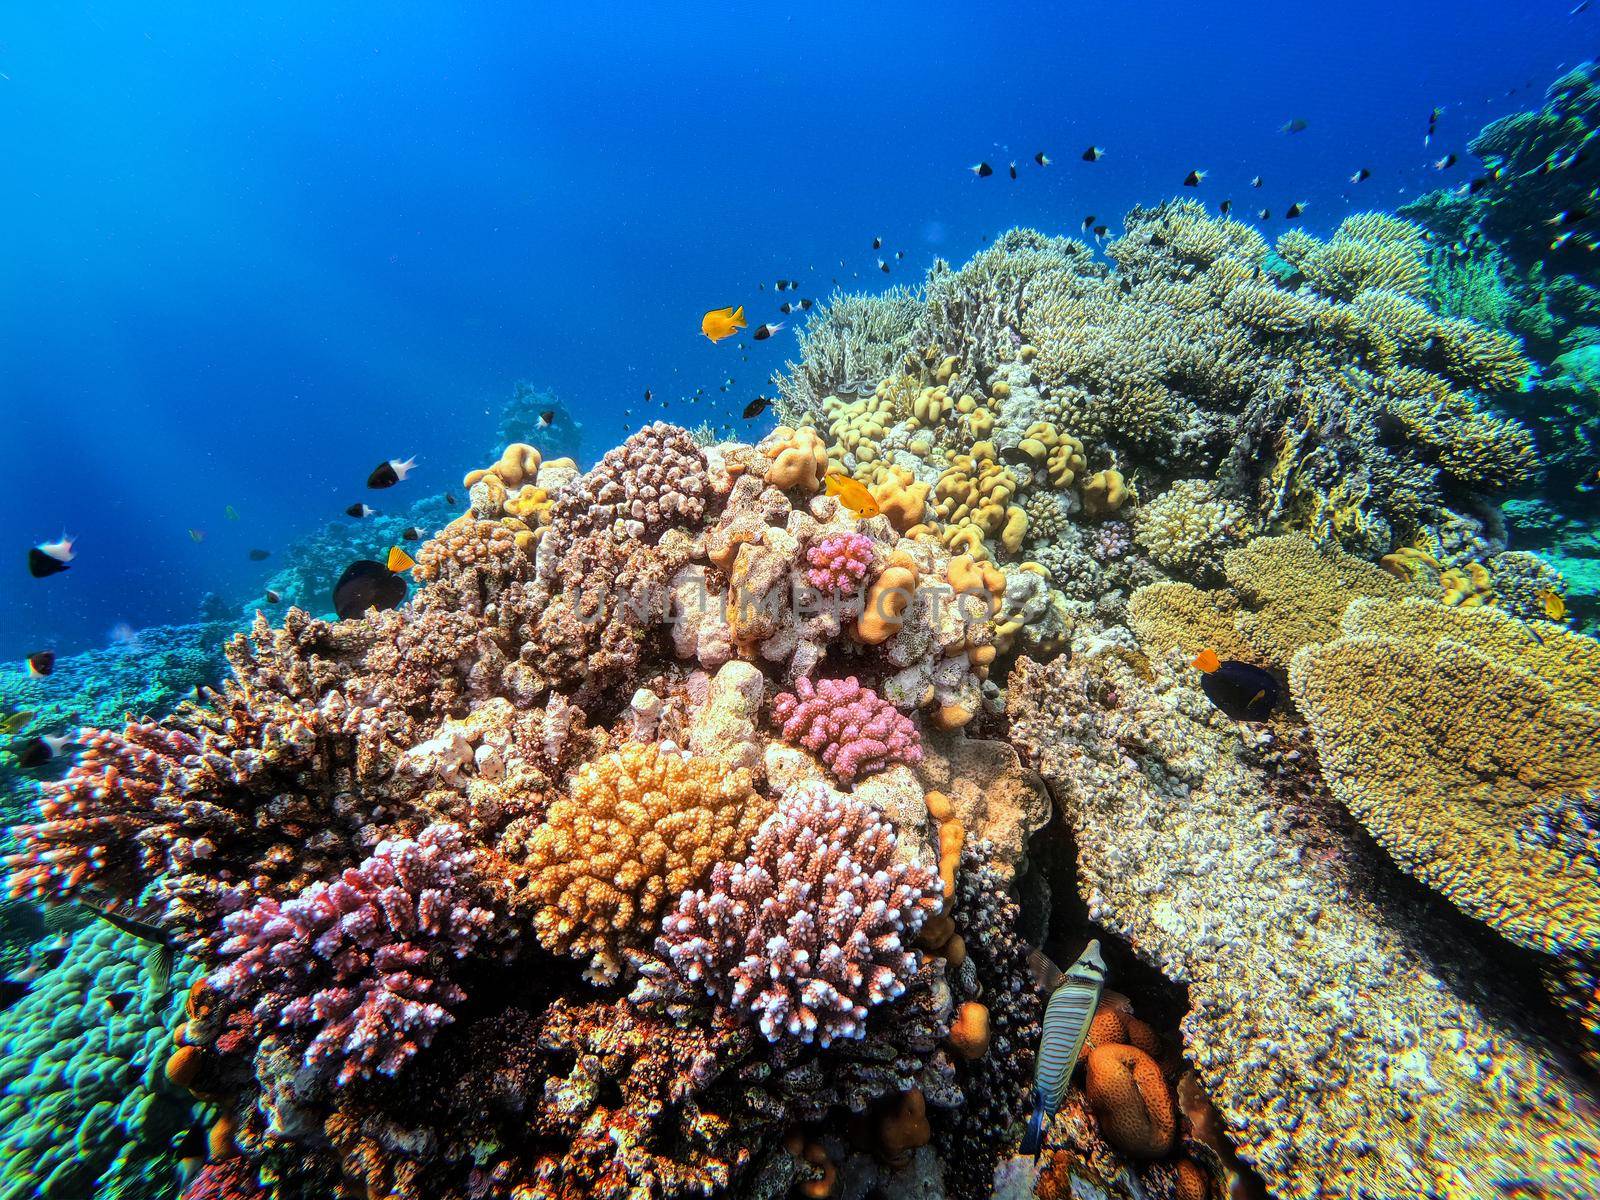 Coral on reef in red sea, fantastic colors under water, Marsa Alam, Egypt